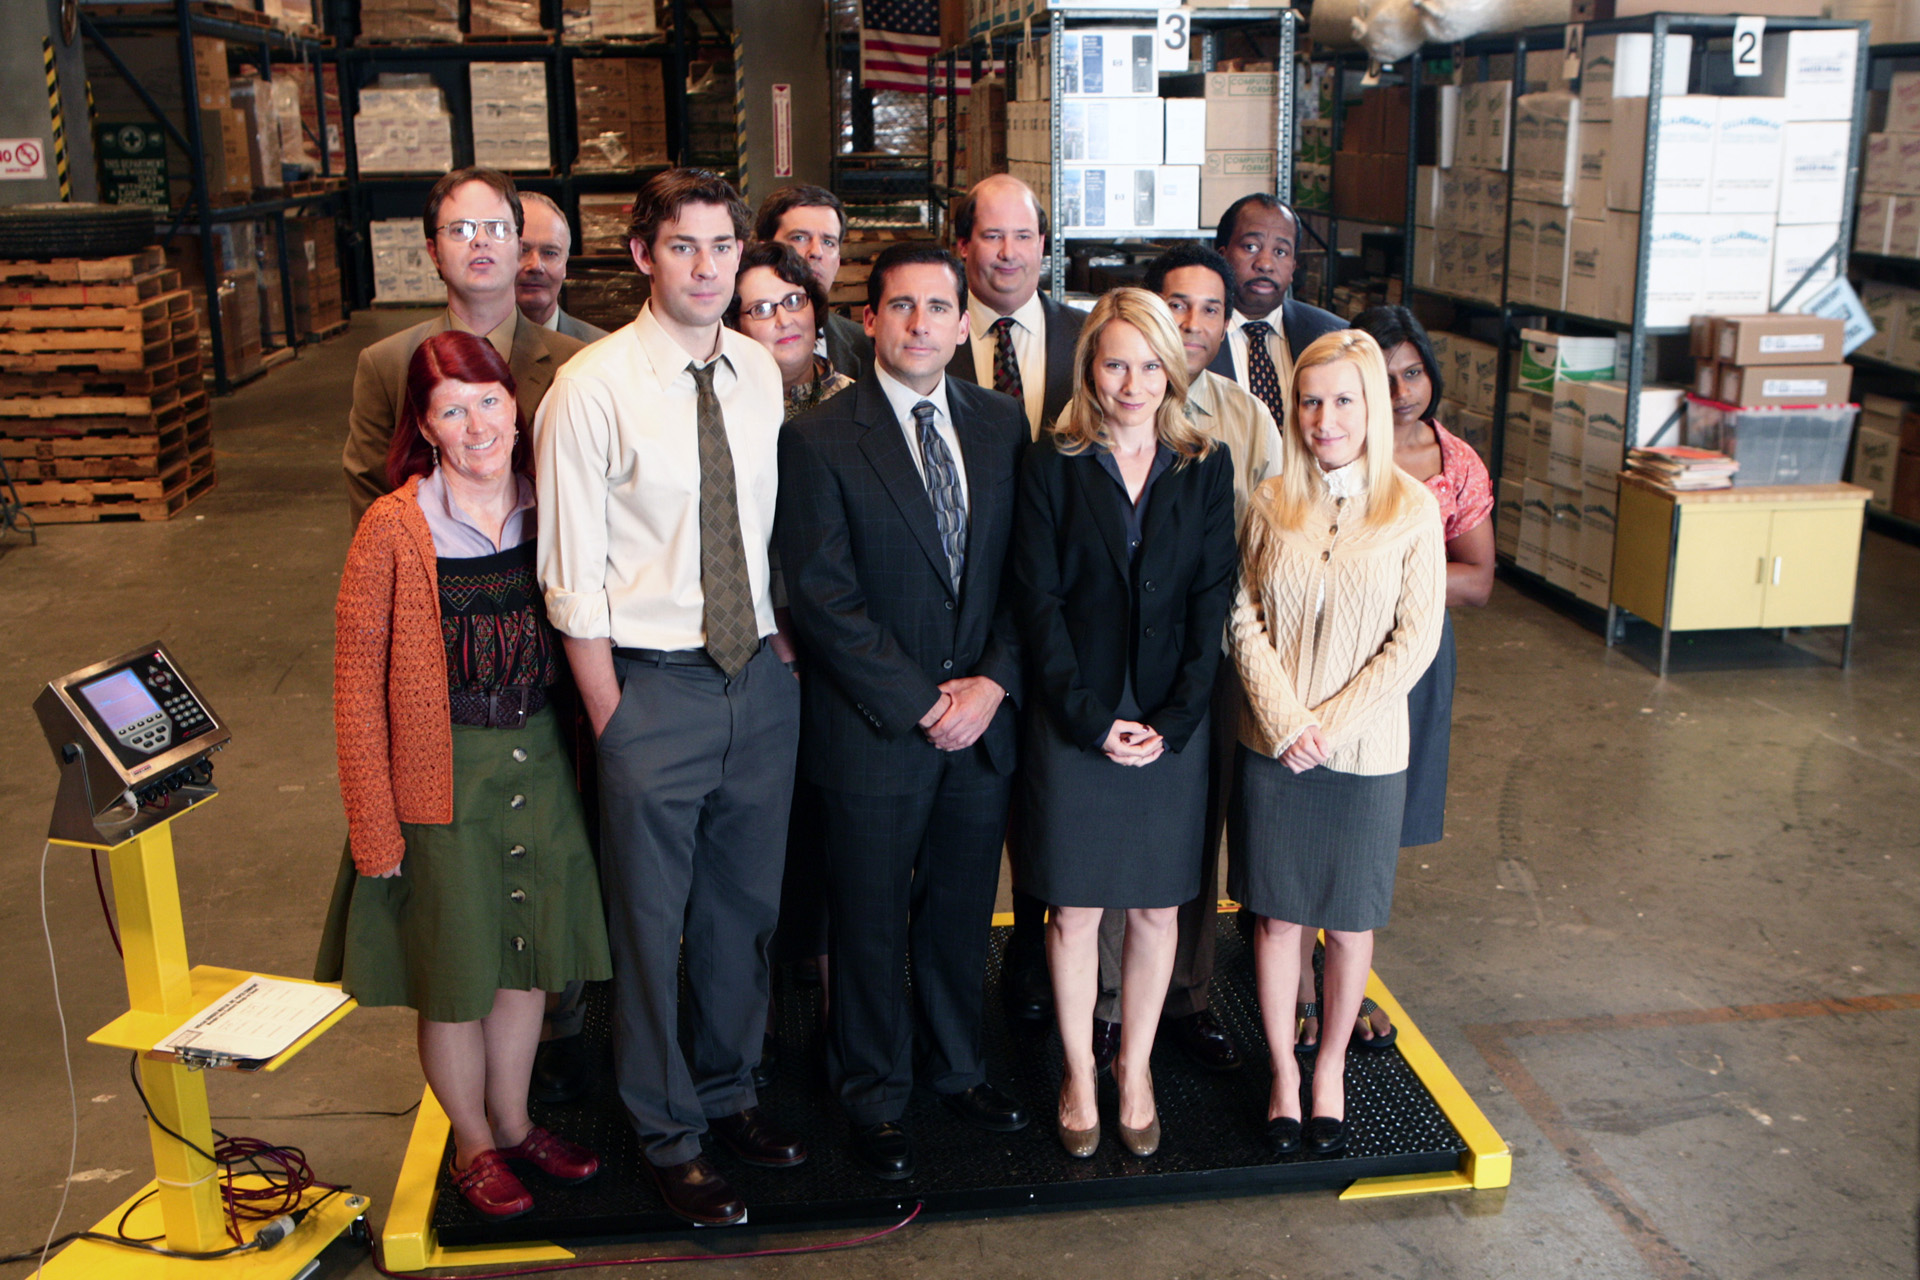 Is There Going To Be A Reboot Of The Office?